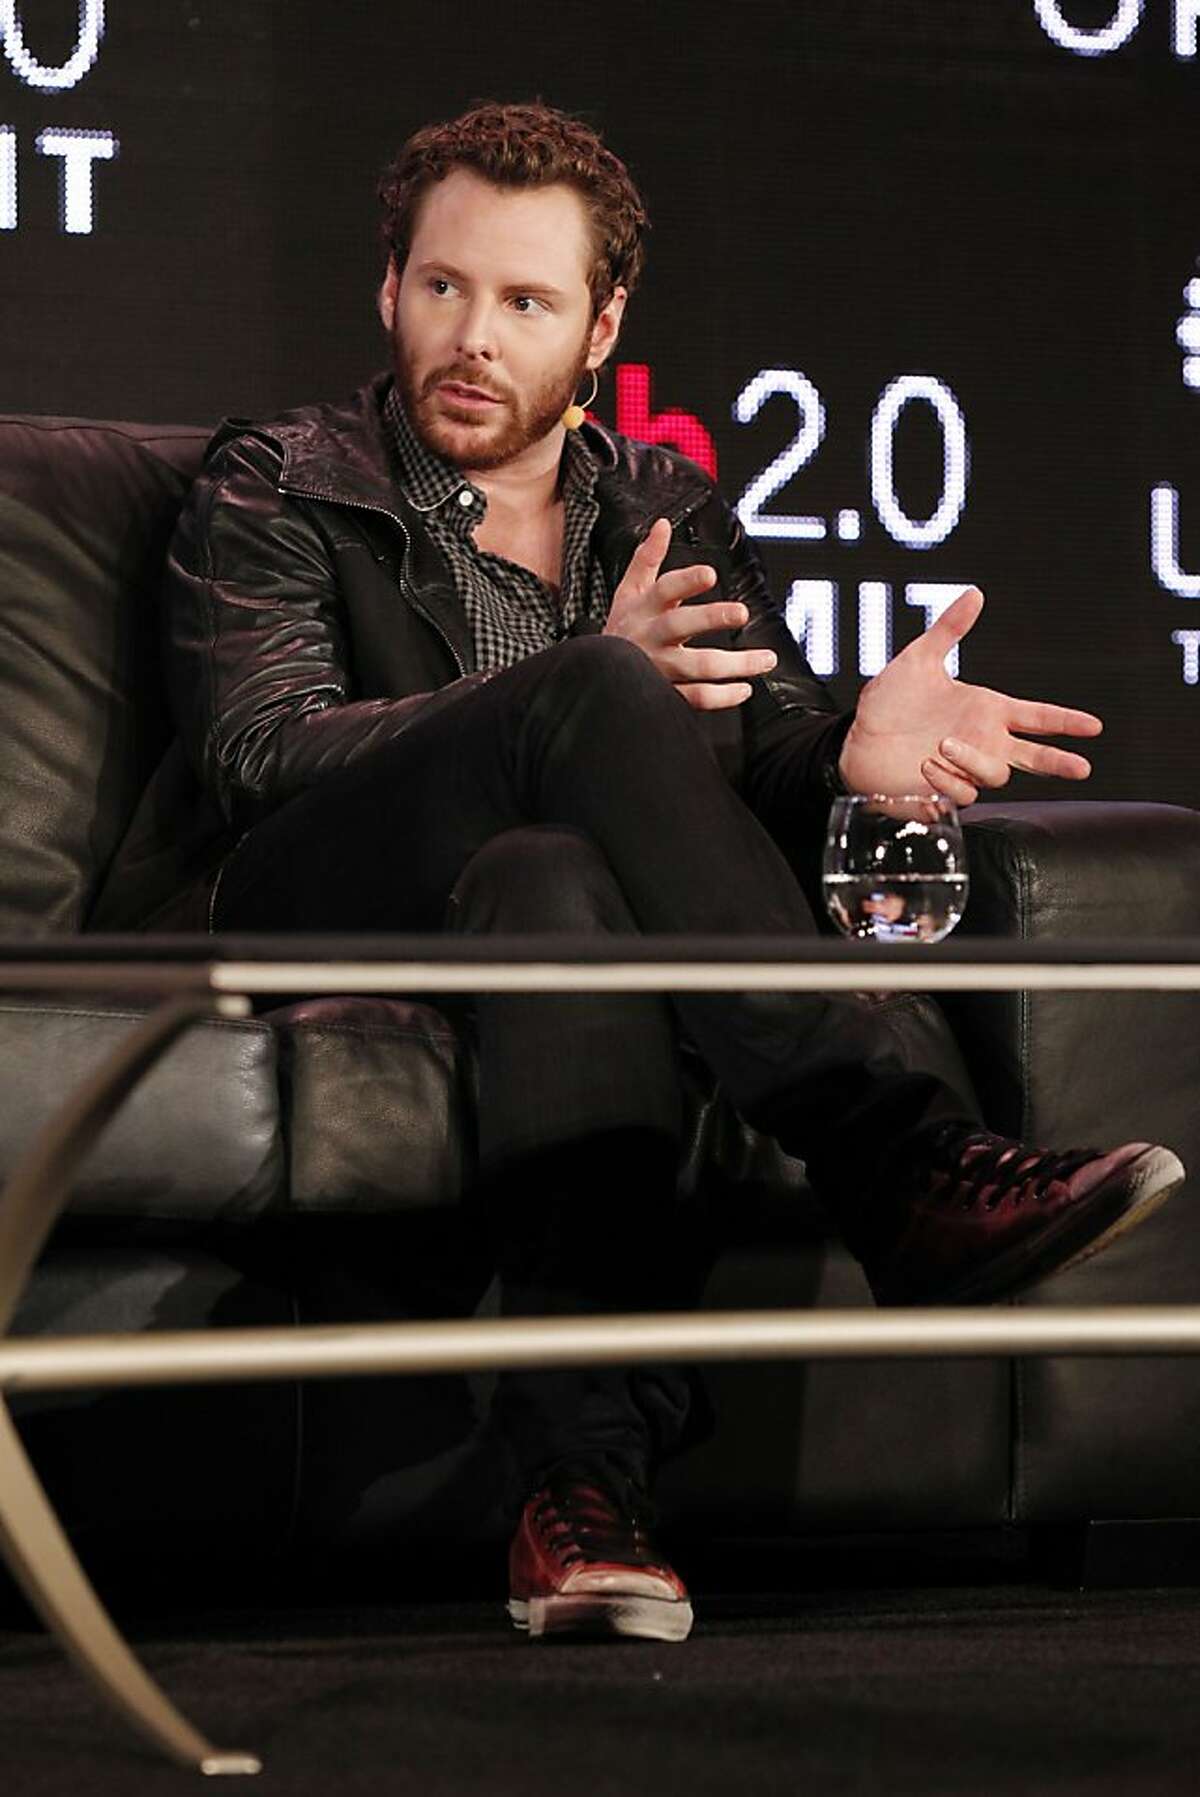 Sean Parker, of Spotify, answers questions at the Web 2.0 Summit at the Palace Hotel on Monday, October 17, 2011 in San Francisco, Calif.